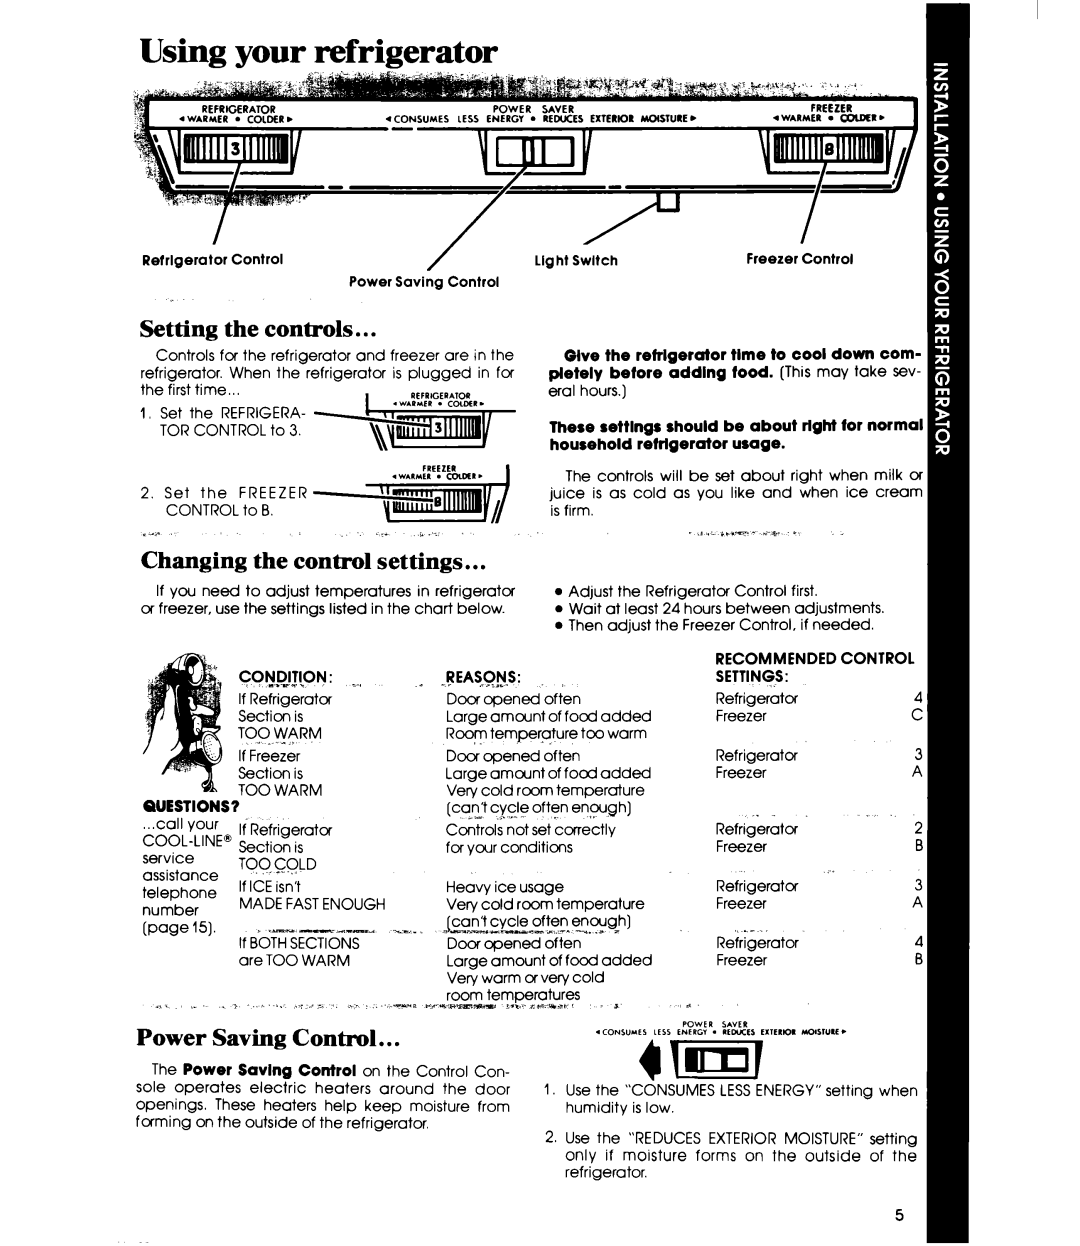 Whirlpool ETl4EP manual Using your refrigerator, Setting the controls, Changing the control settings, Power Saving Control 